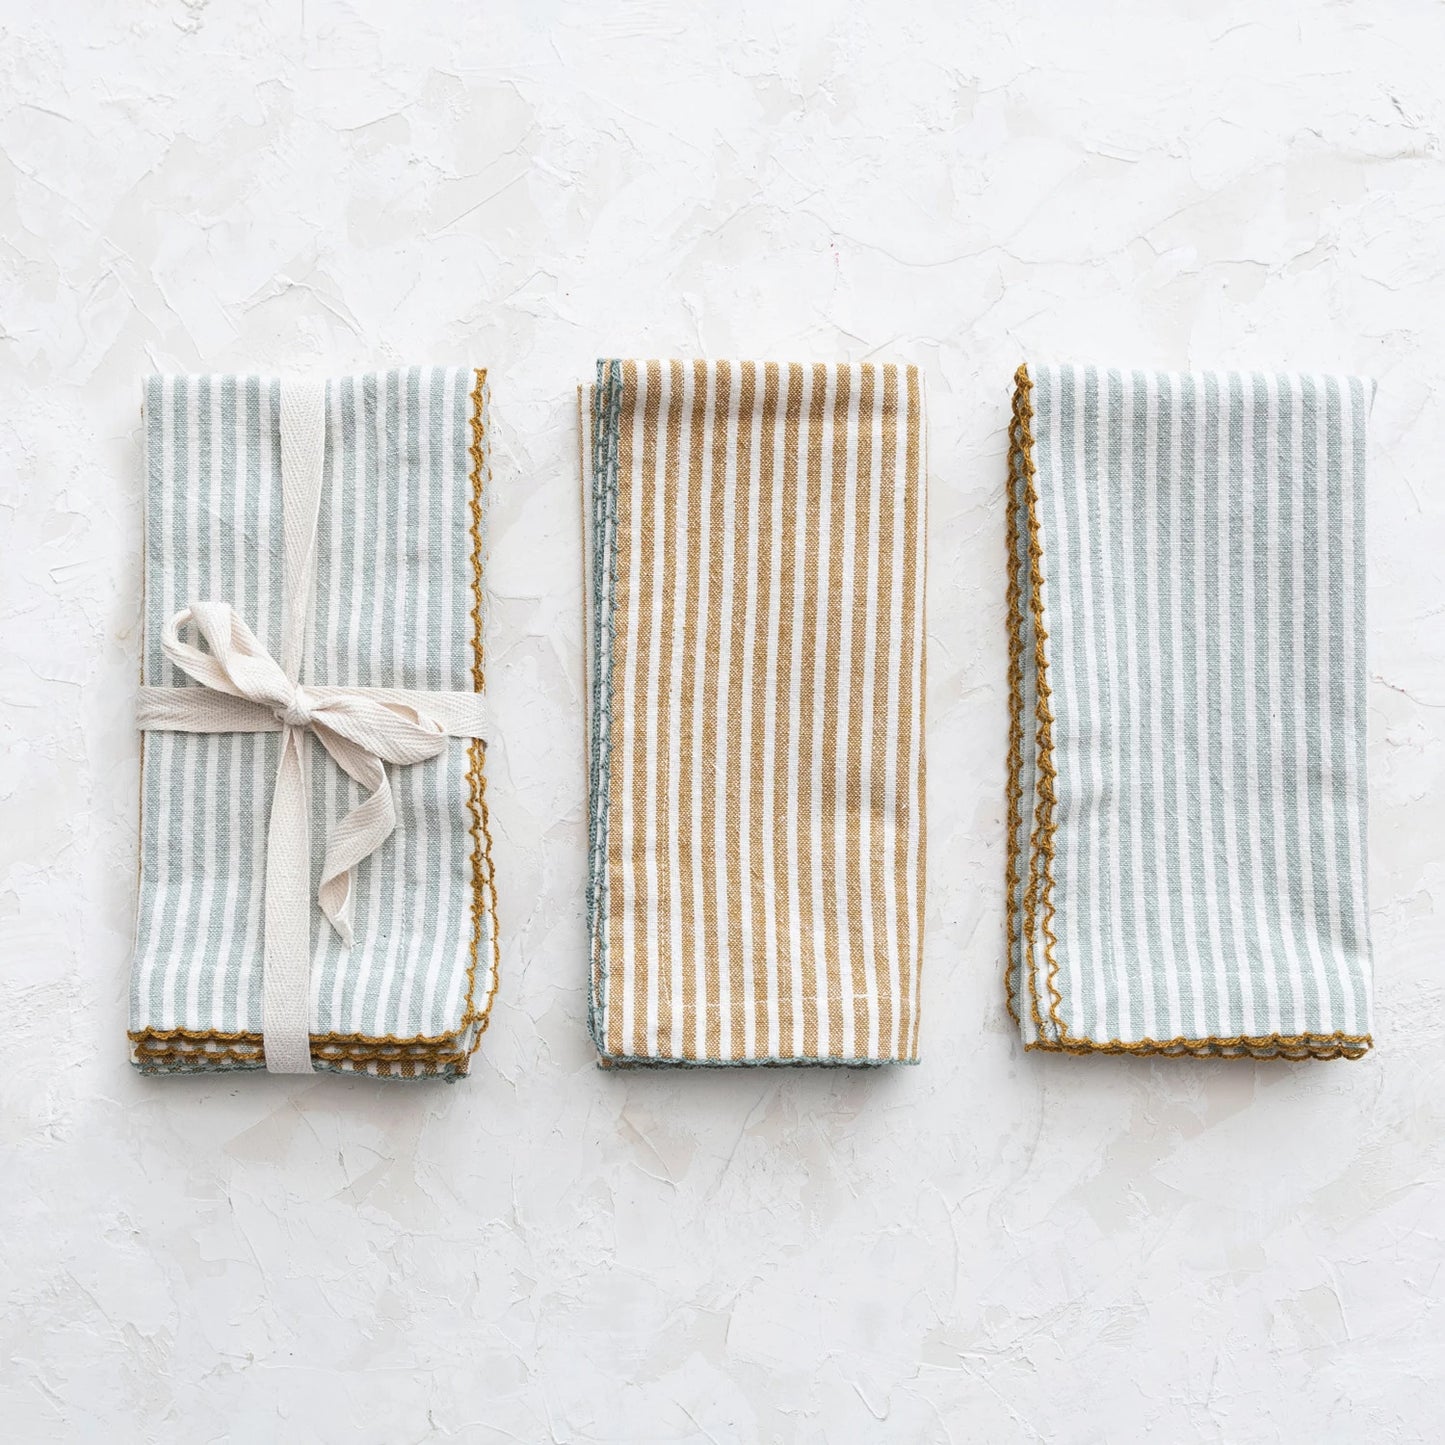 set of napkins folded and tied together with ribbon and 2 other napkins folded and set next to it on a grey surface.